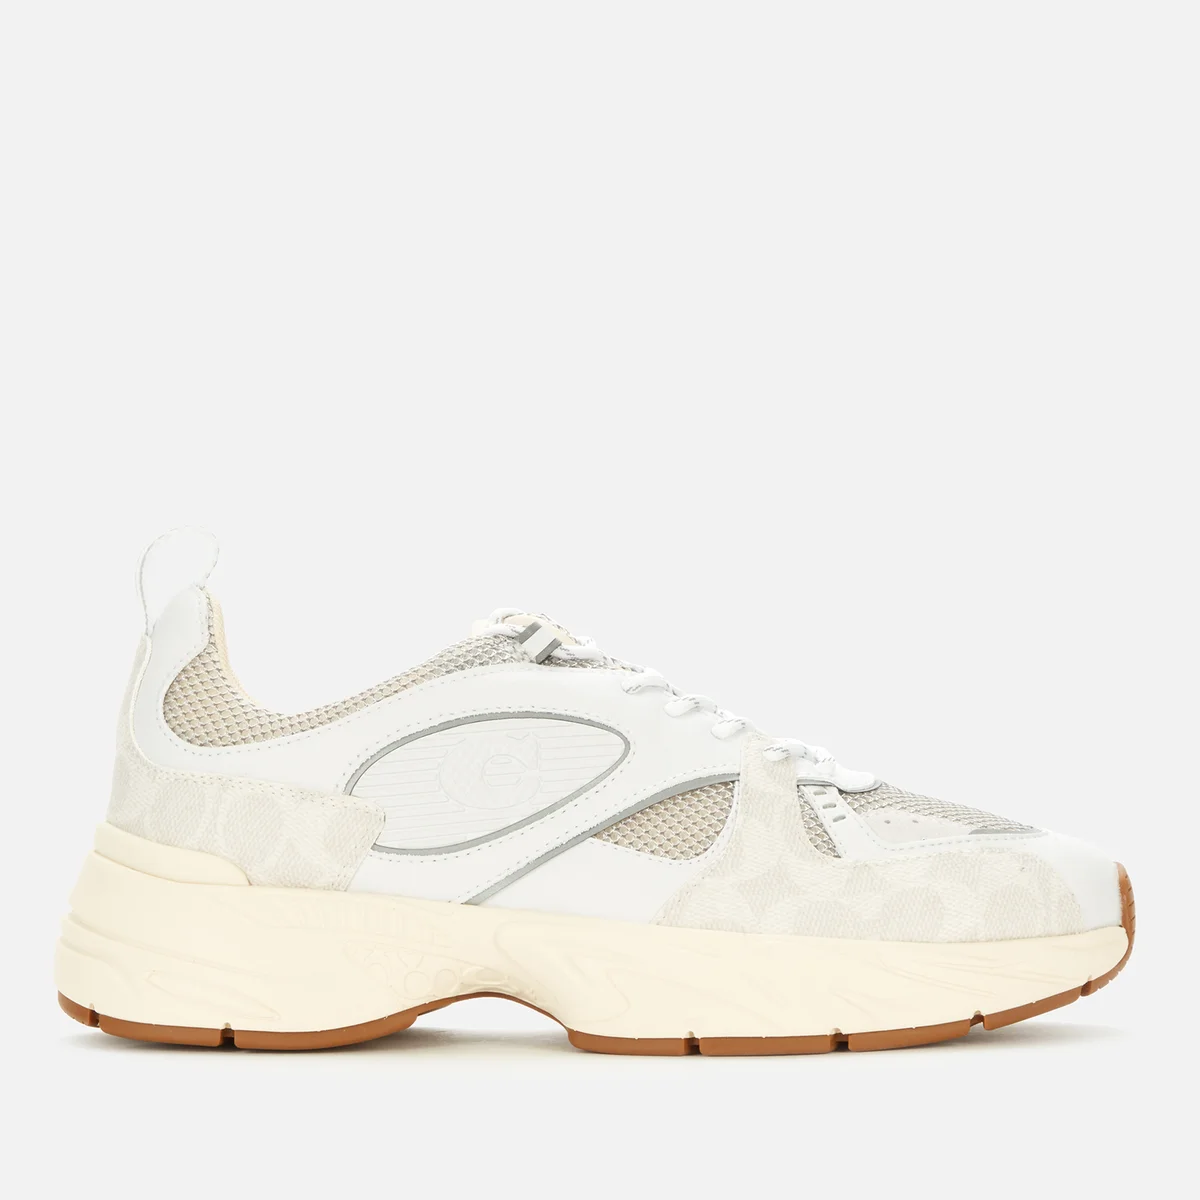 Coach Men's Tech Running Style Trainers - Optic White Image 1